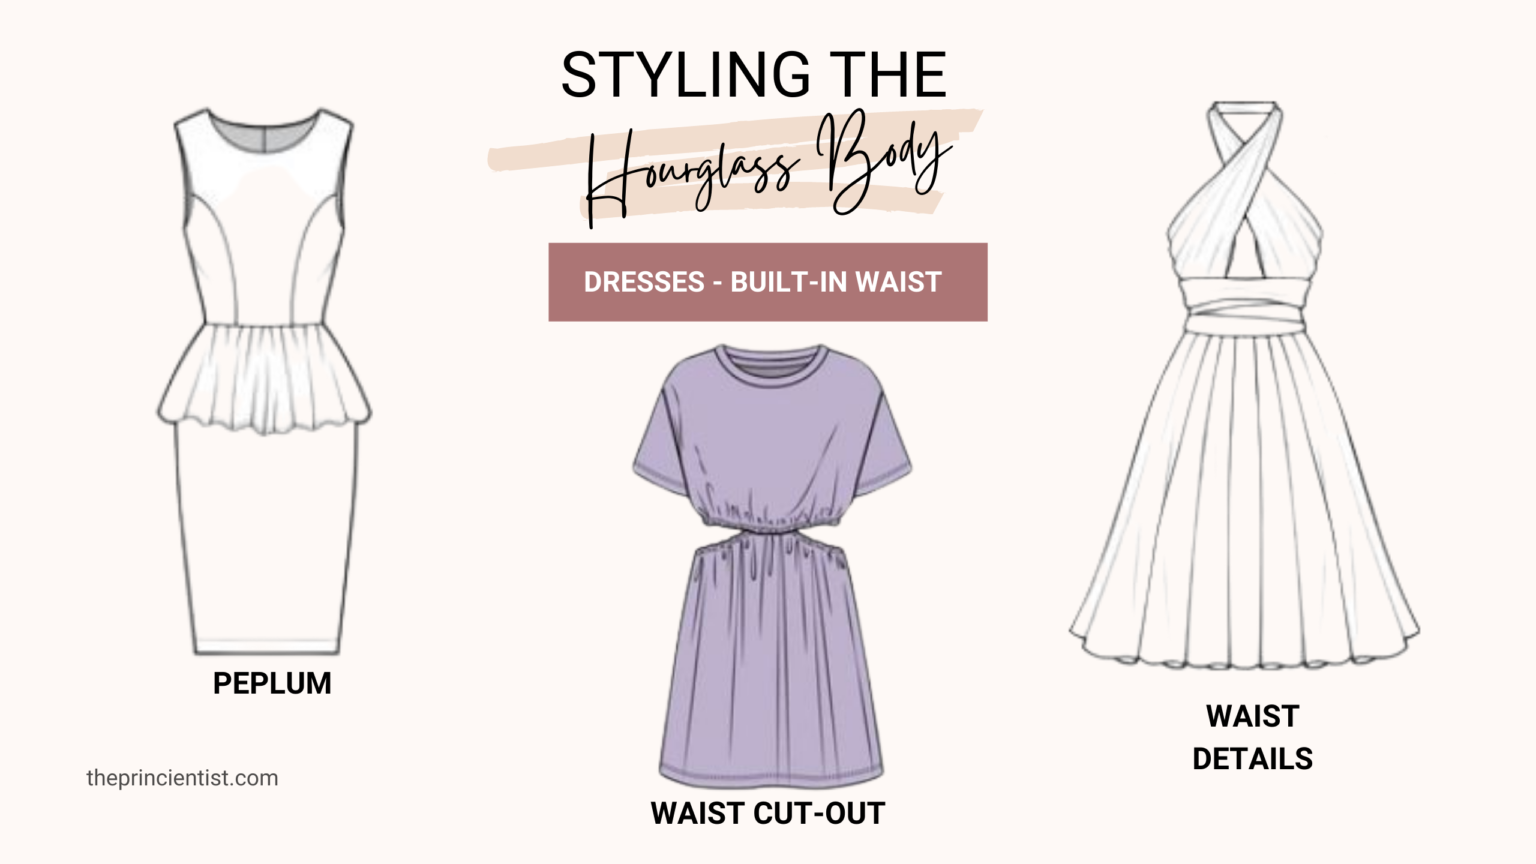 how to dress the hourglass body shape - dresses 2 - built-in waist